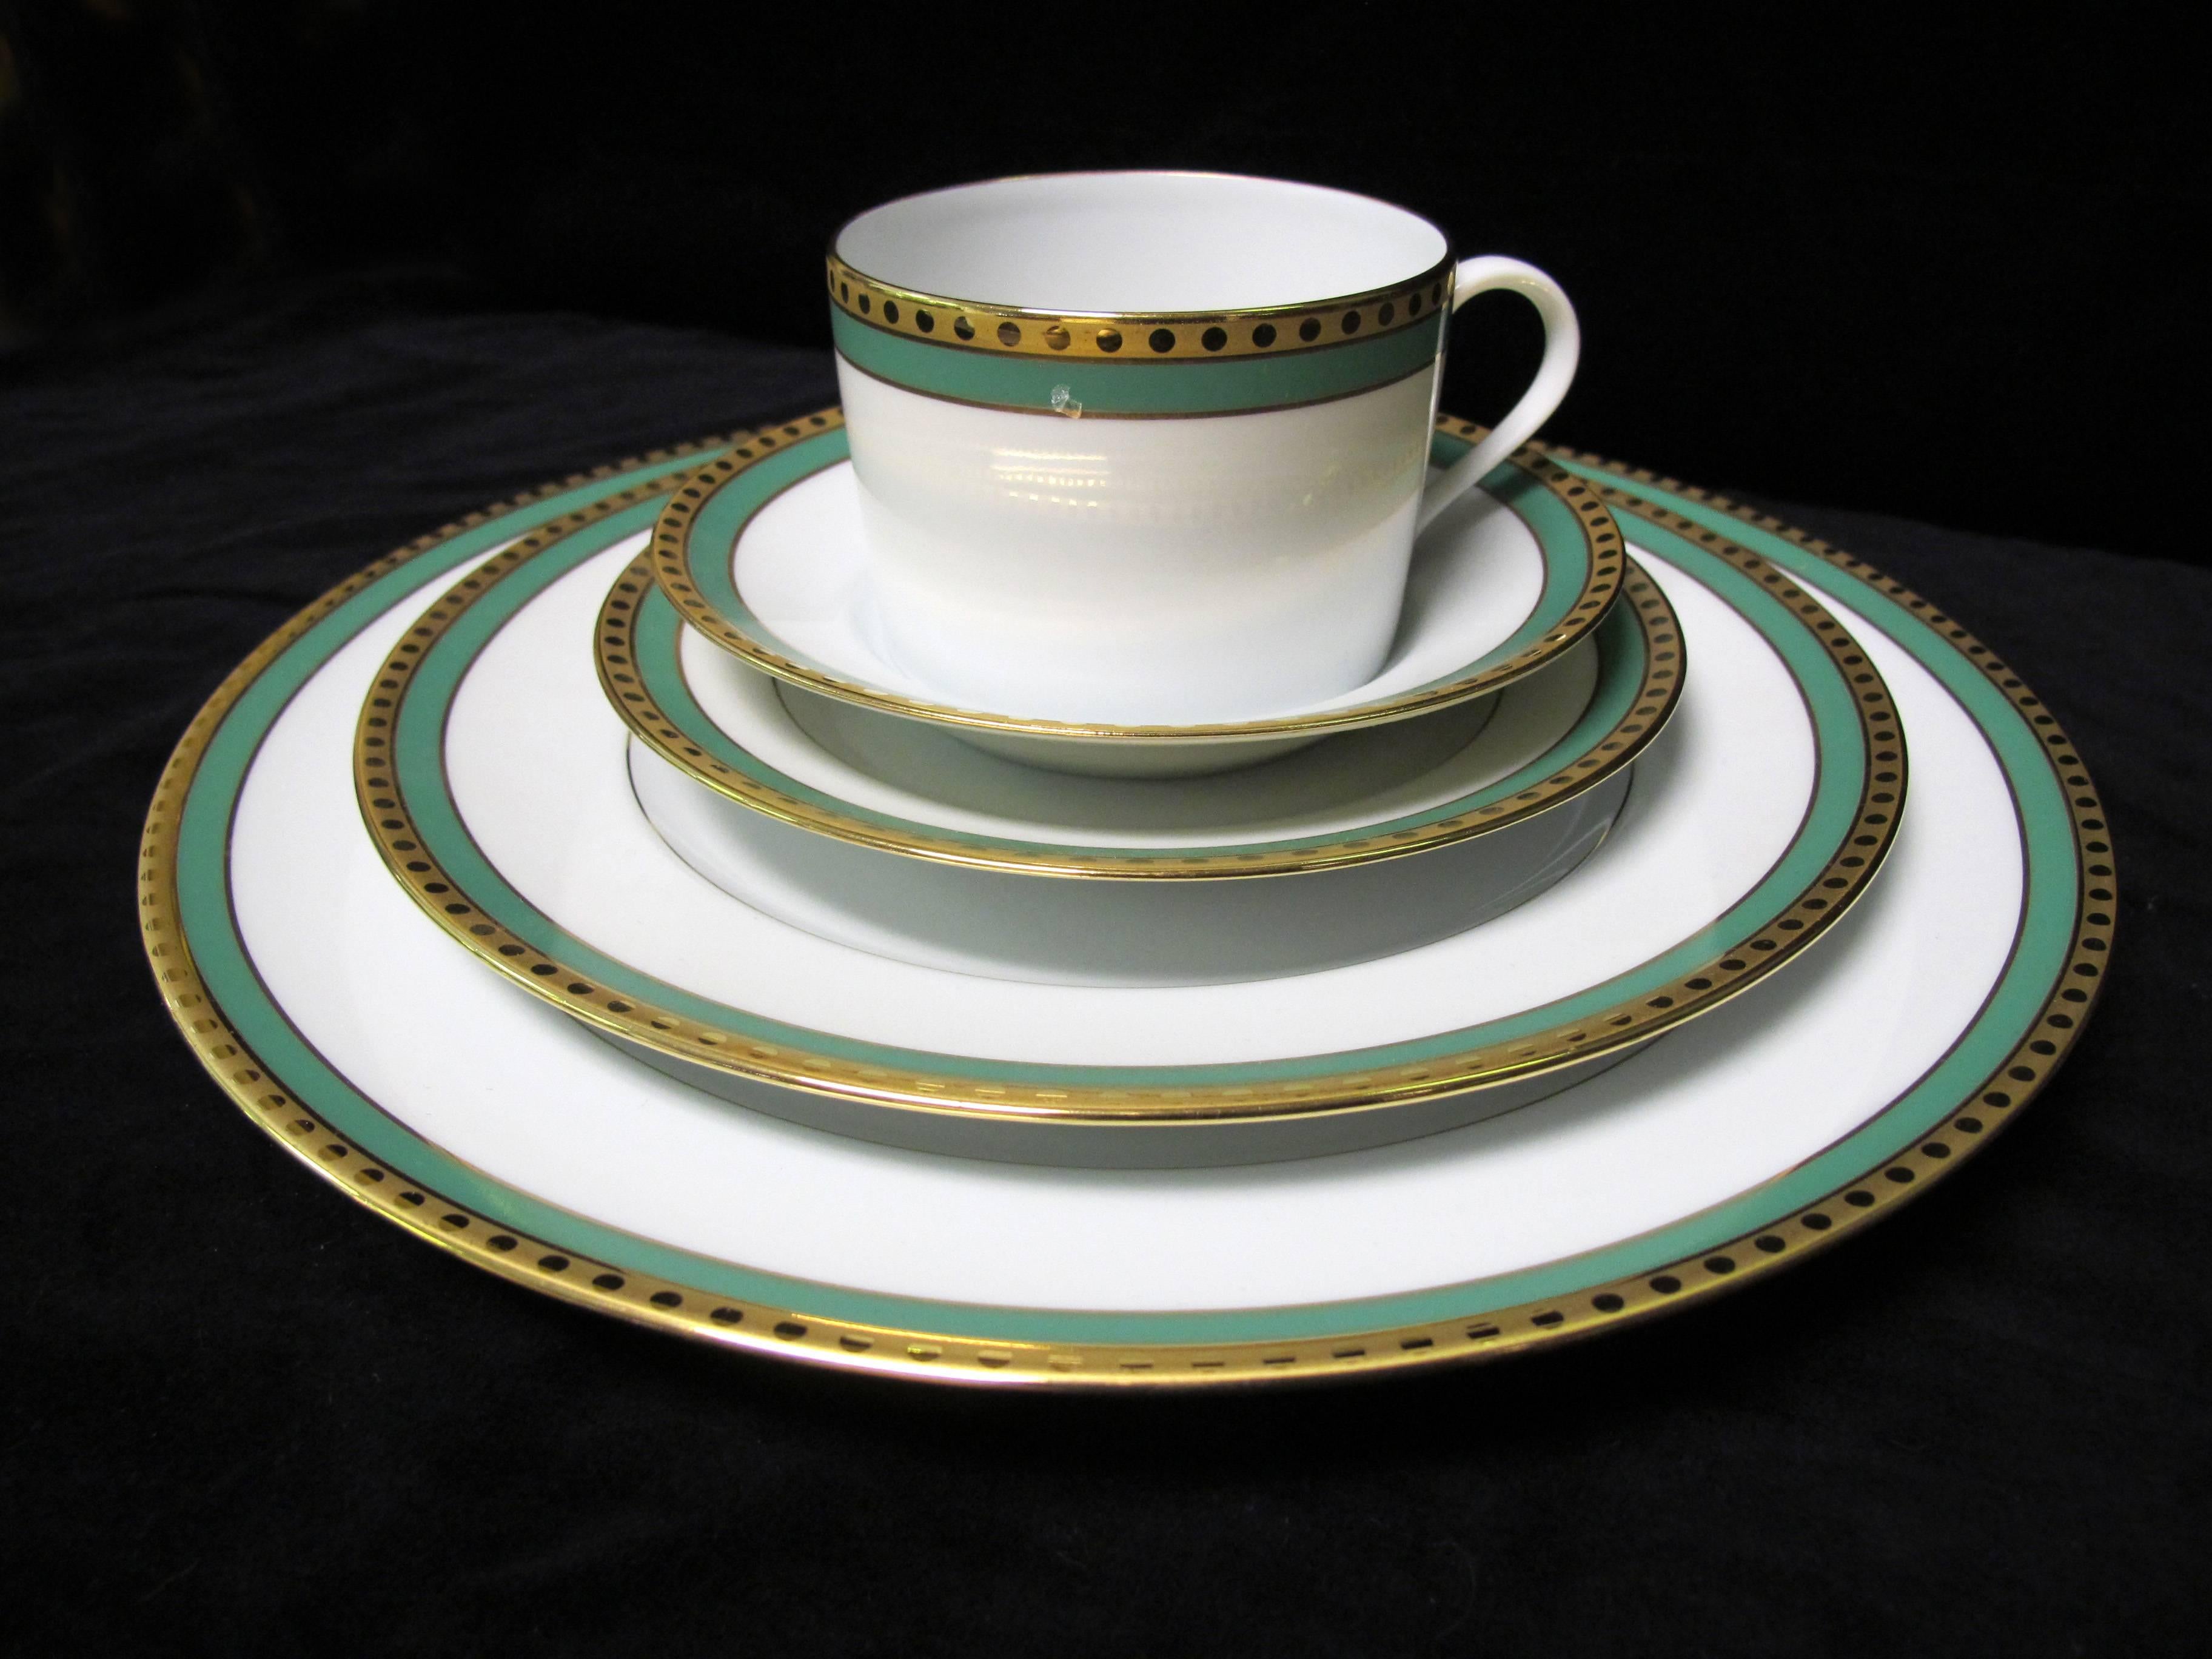 Tiffany & Co. green band, single place setting of five pieces.
Plate sizes from the largest to the smallest are;
Measures: 11